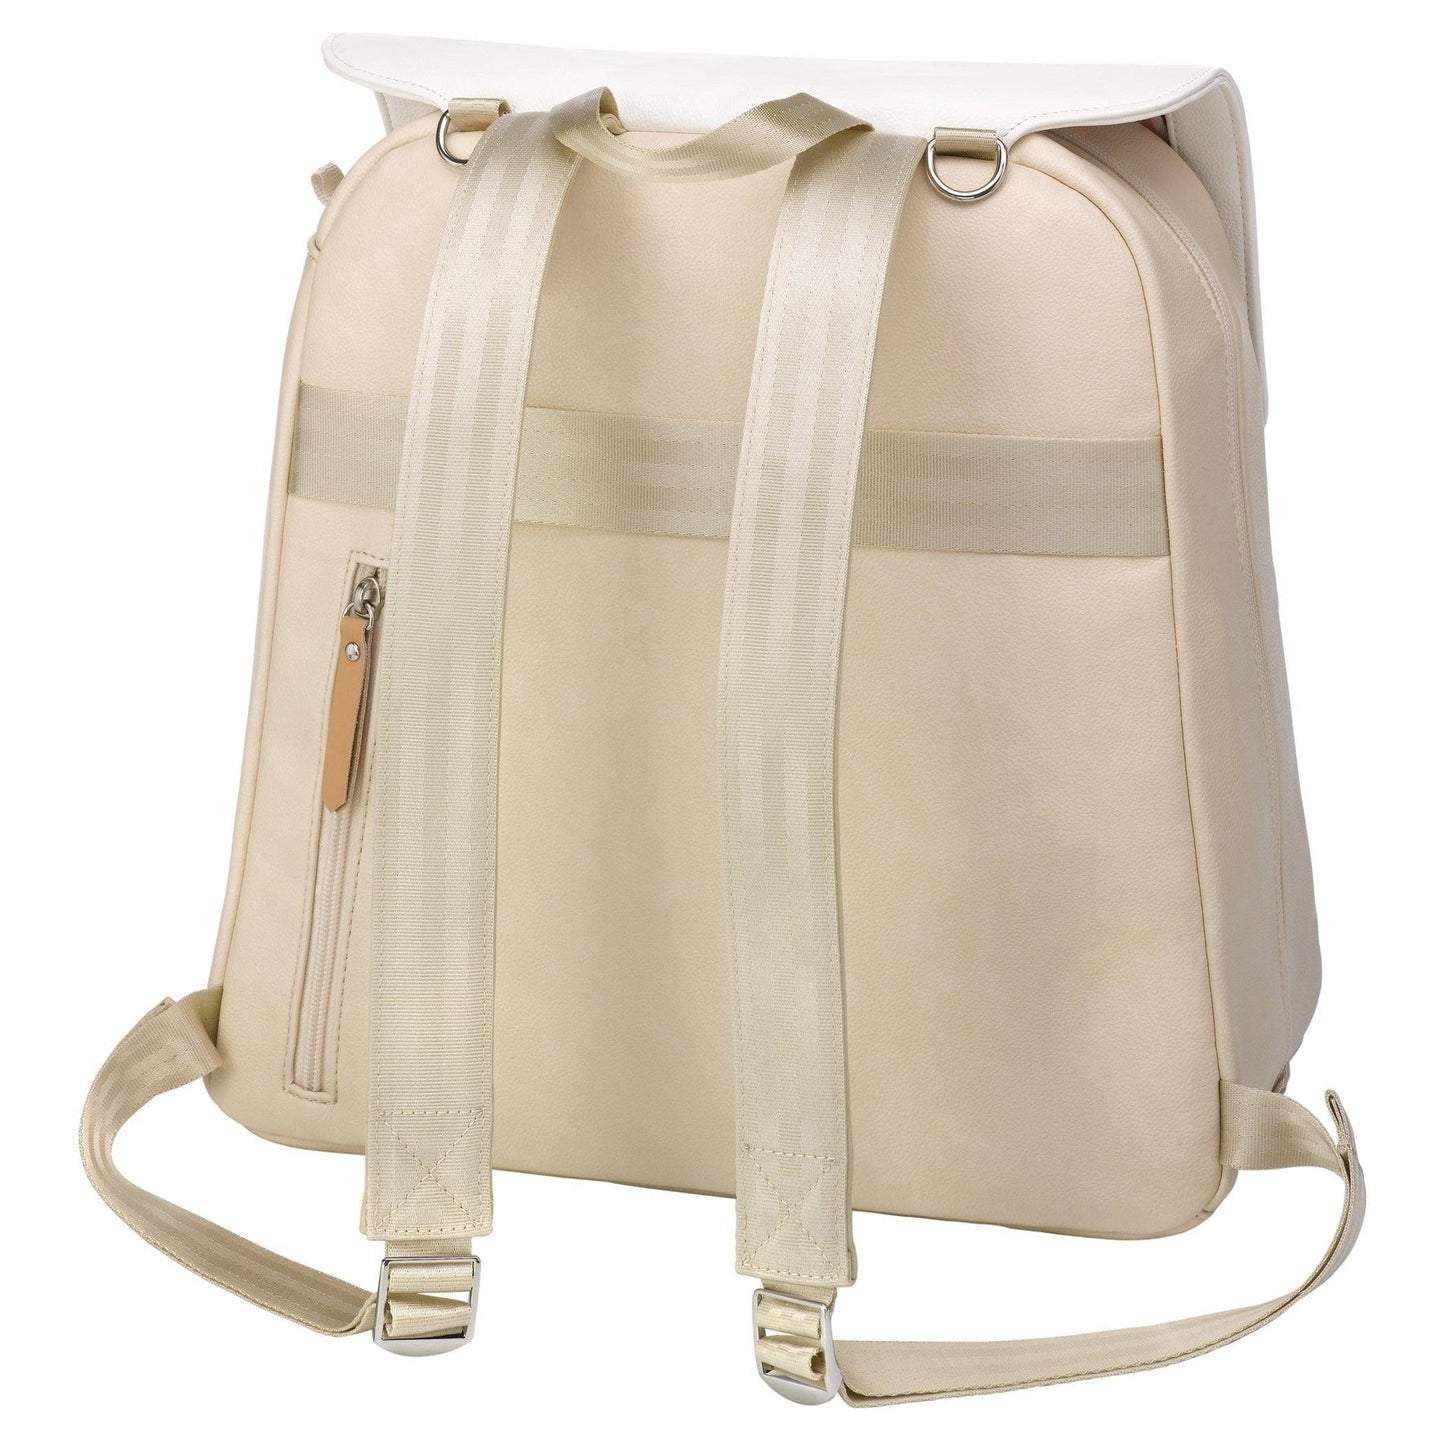 META BACKPACK IN TOASTED MARSHMALLOW